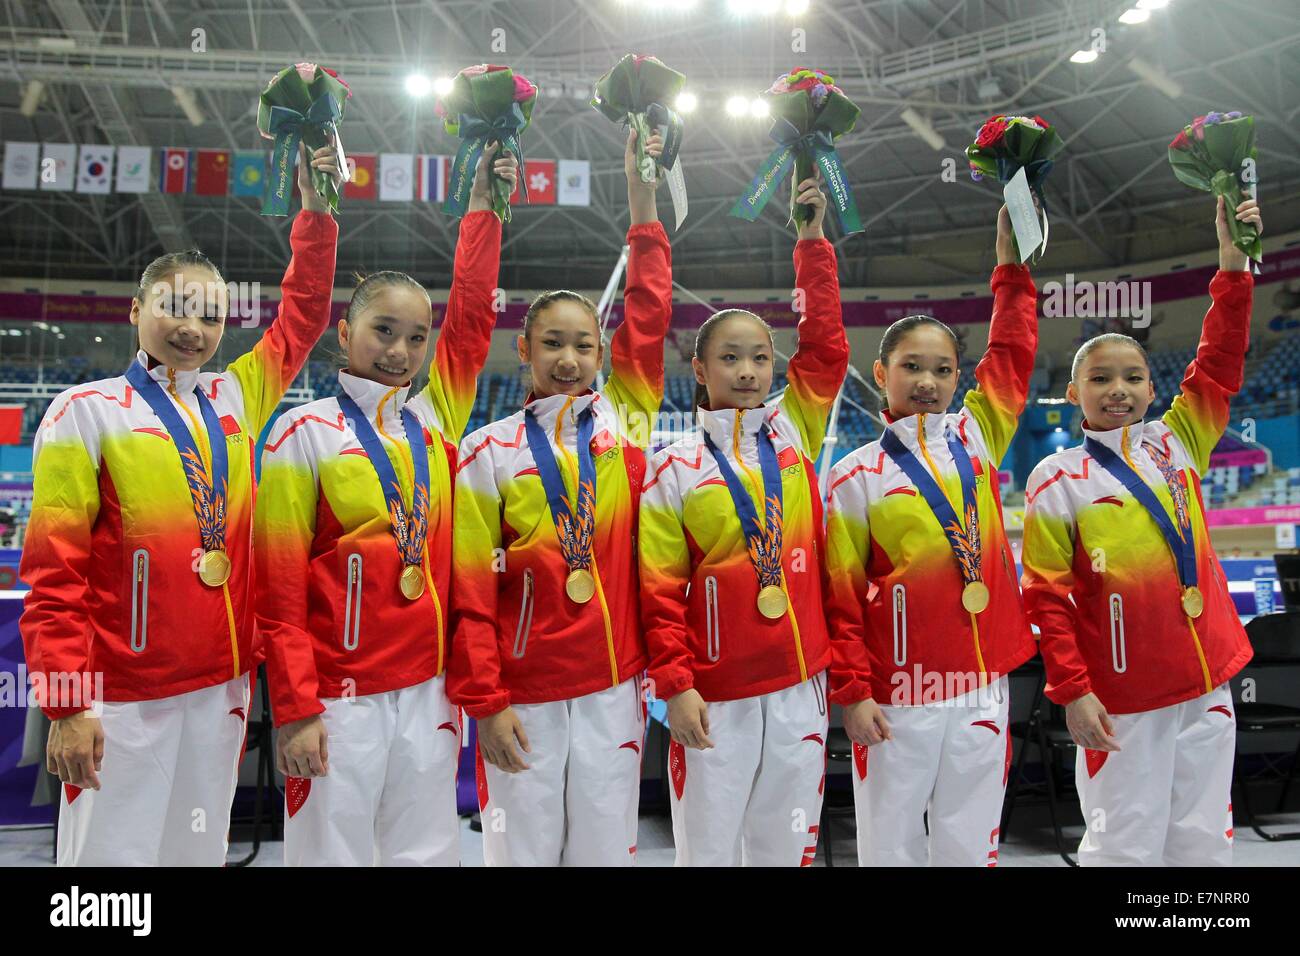 Incheon, South Korea. 22nd Sep, 2014. Chinese athletes Huang Huidan, Yao Jinnan, Bai Yawen, Tan Jiaxin, Chen Siyi and Shang Chunsong (from L to R) pose on the podium during the awarding ceremony of women's team contest of gymnastics artistic event at the 17th Asian Games in Incheon, South Korea, Sept. 22, 2014. China won the gold medal with 229.300 points. Credit:  Zheng Huansong/Xinhua/Alamy Live News Stock Photo